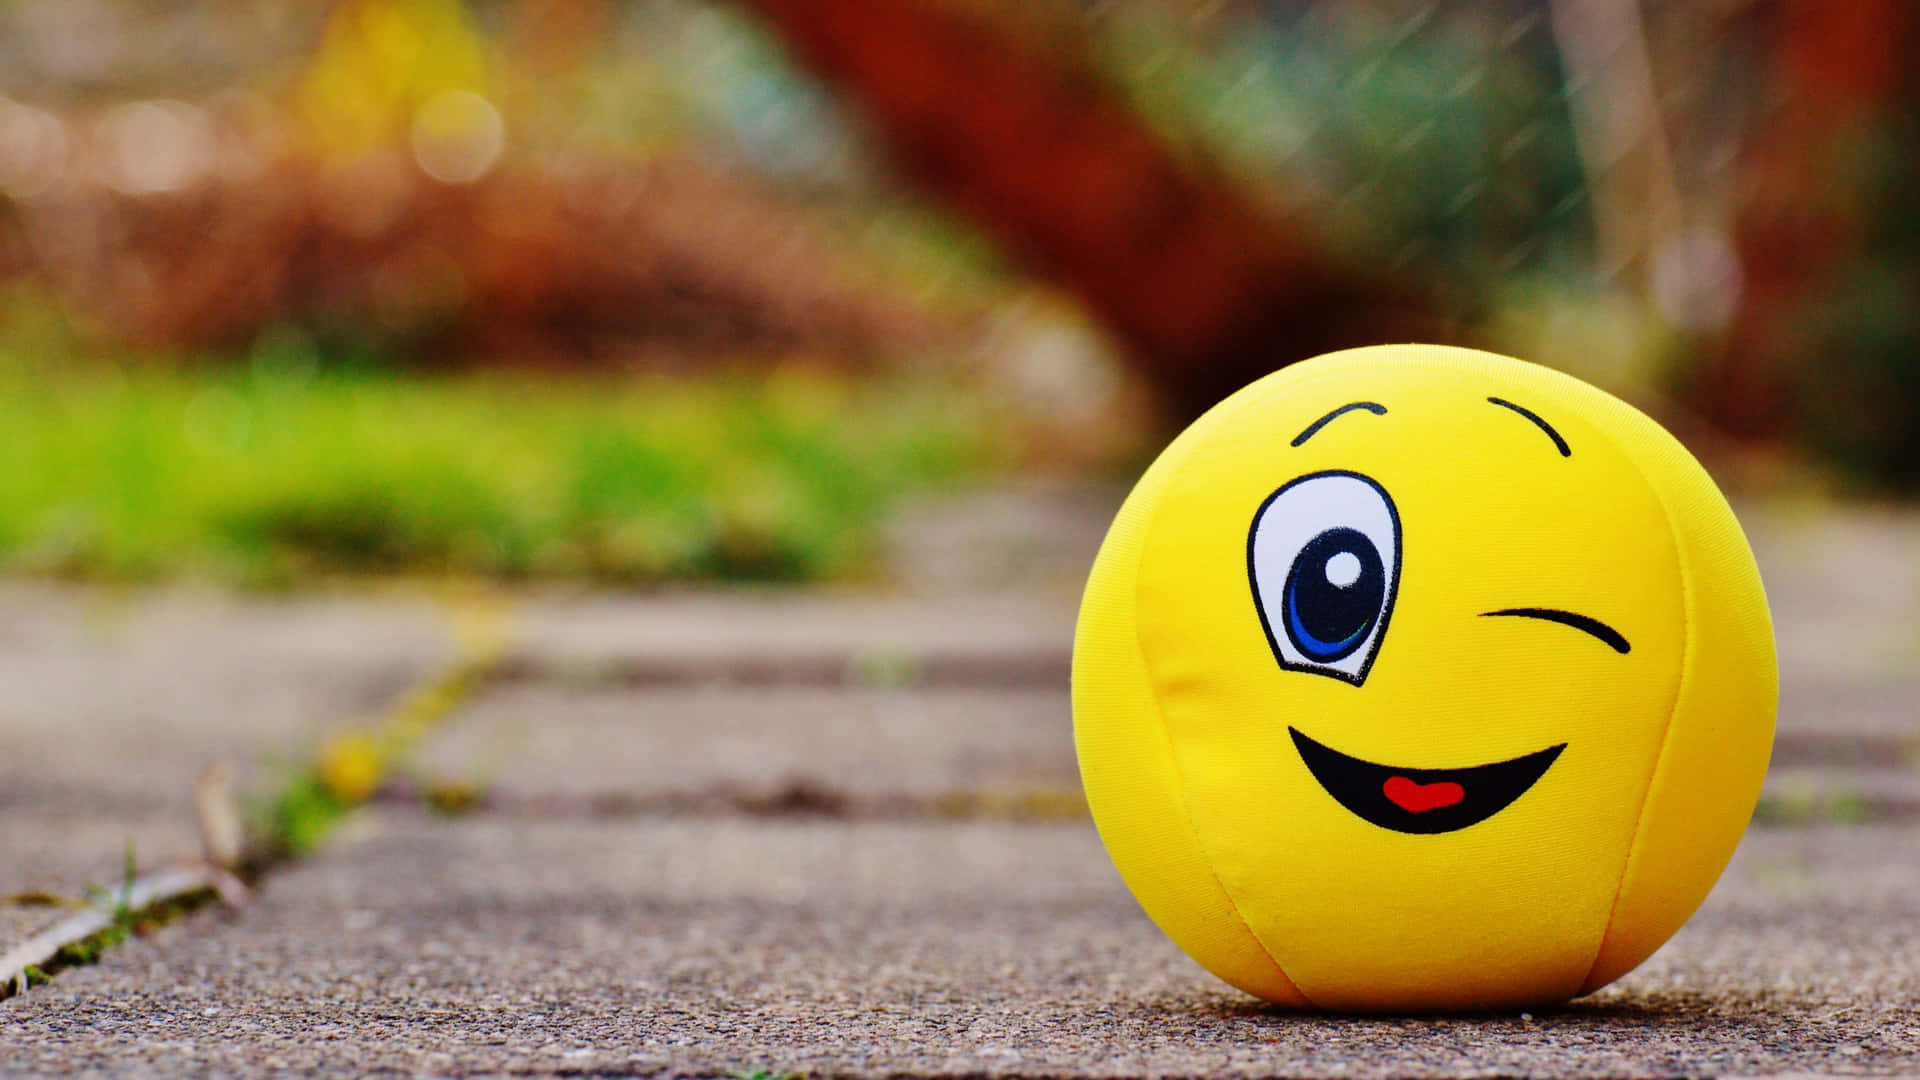 A Vibrant Yellow Smiling Ball Symbolizing Happiness And Positivity Background